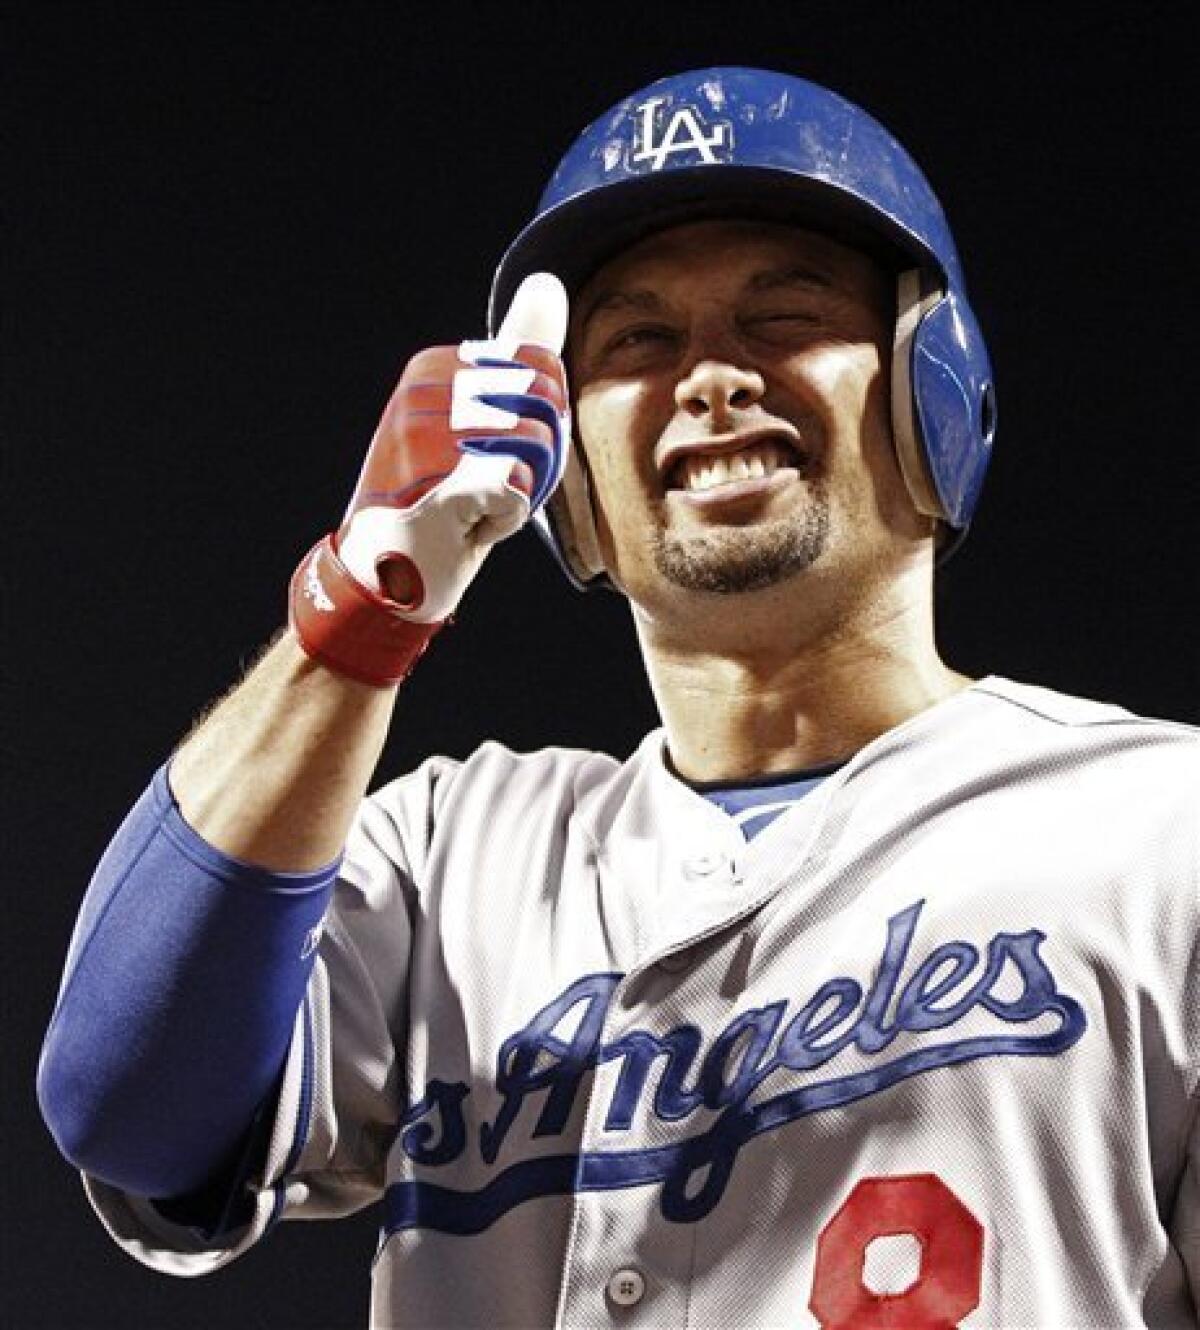 Shane Victorino powers Dodgers past Pirates 5-4 - The San Diego